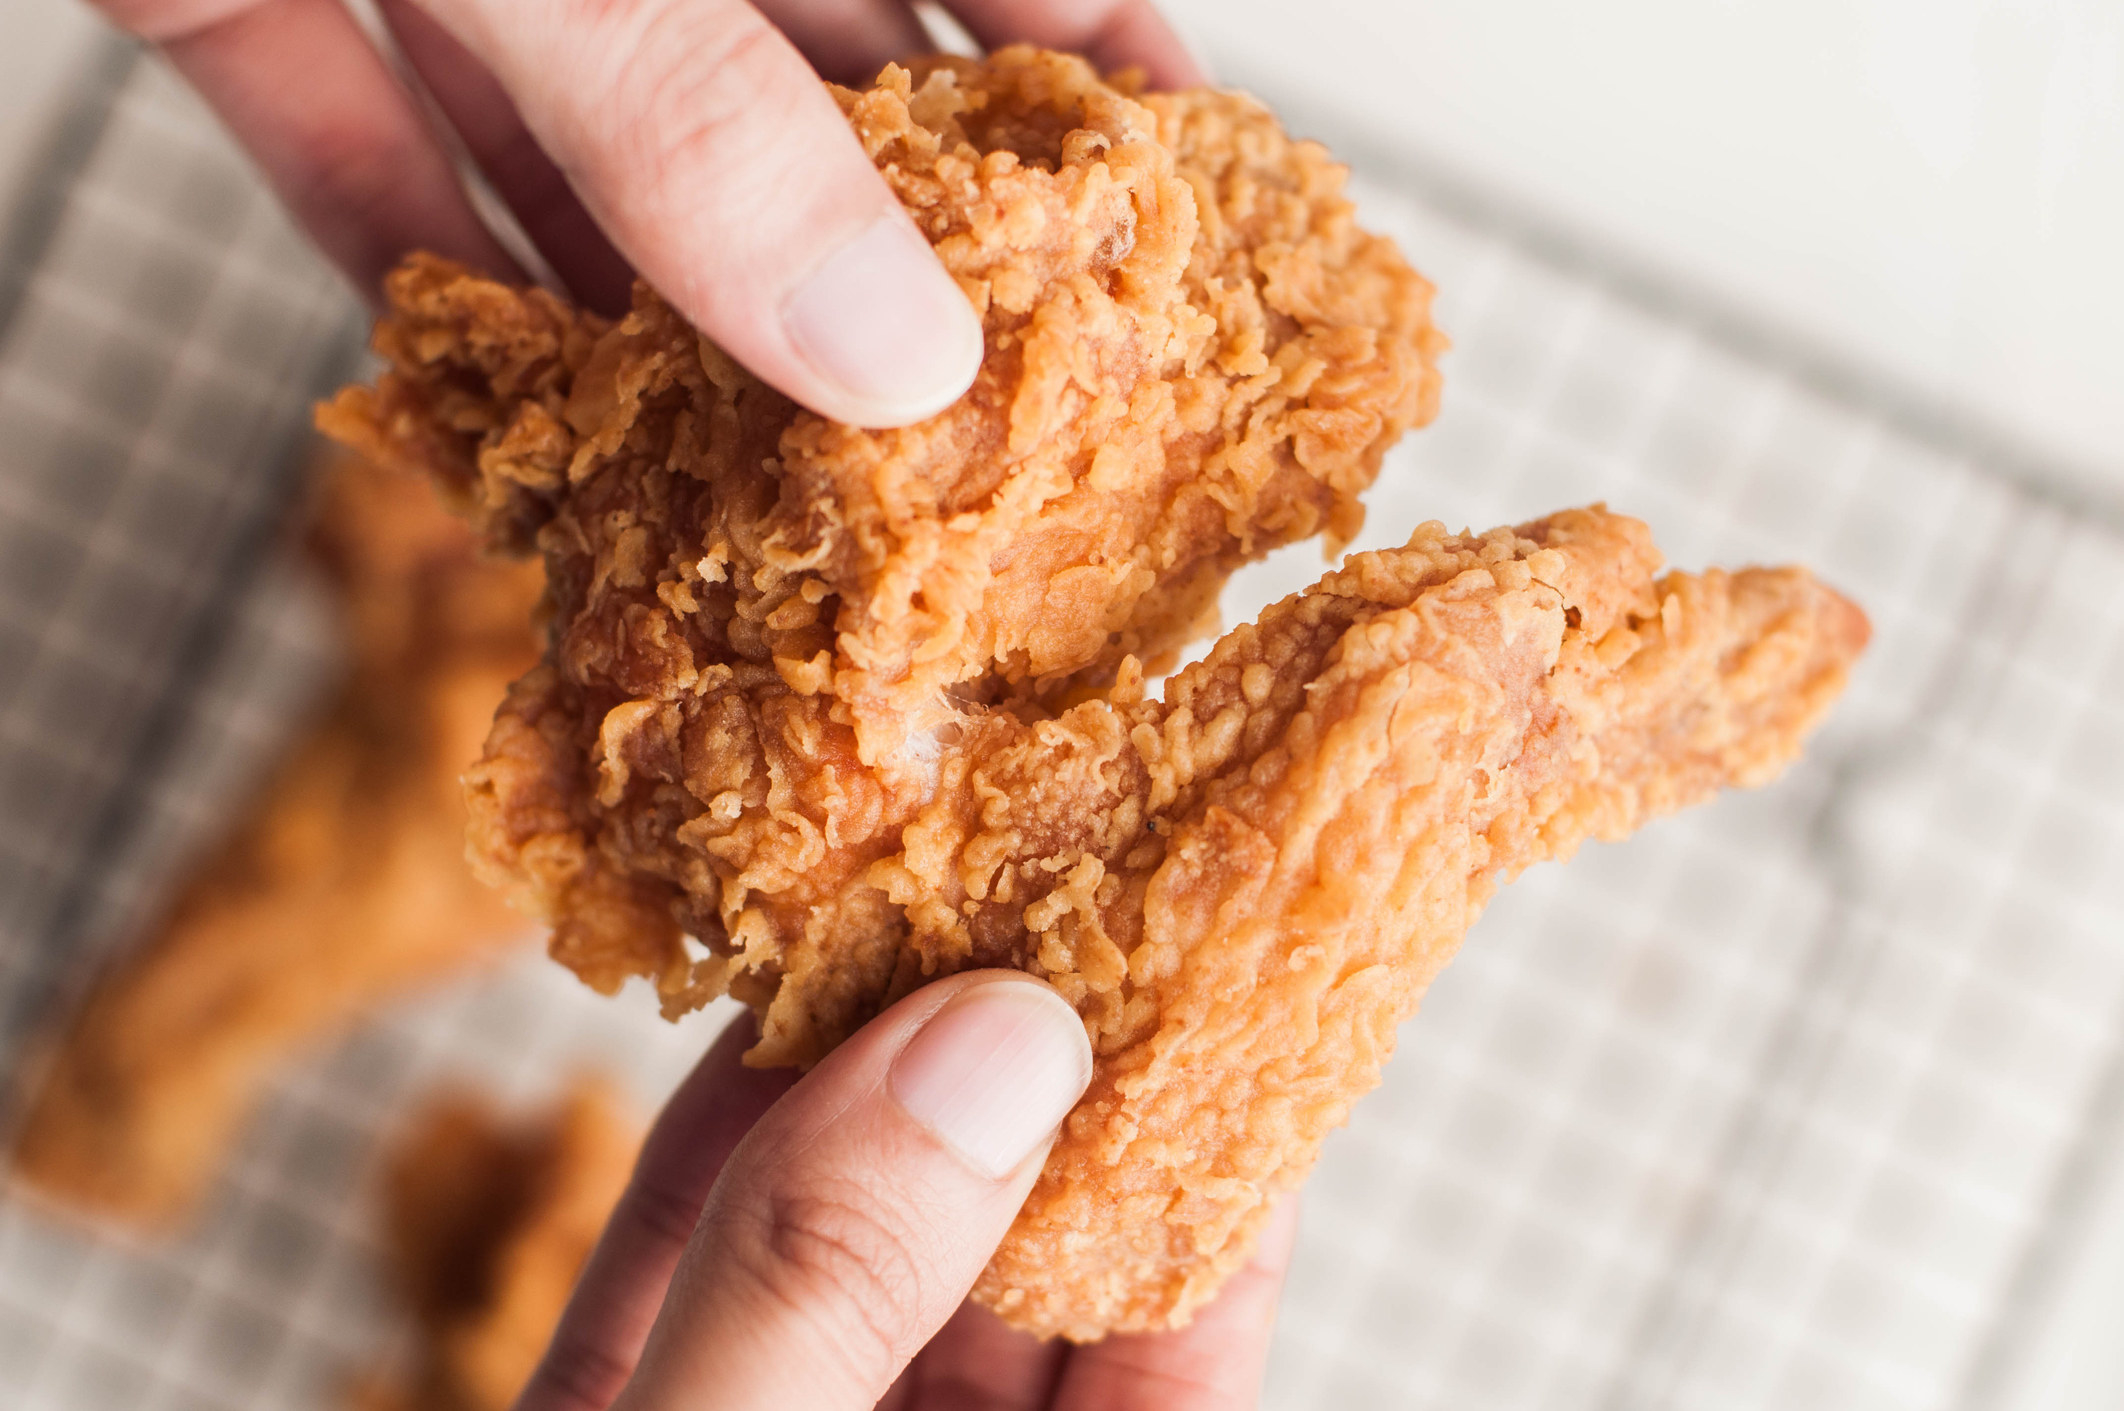 A person holding a fried chicken wing.